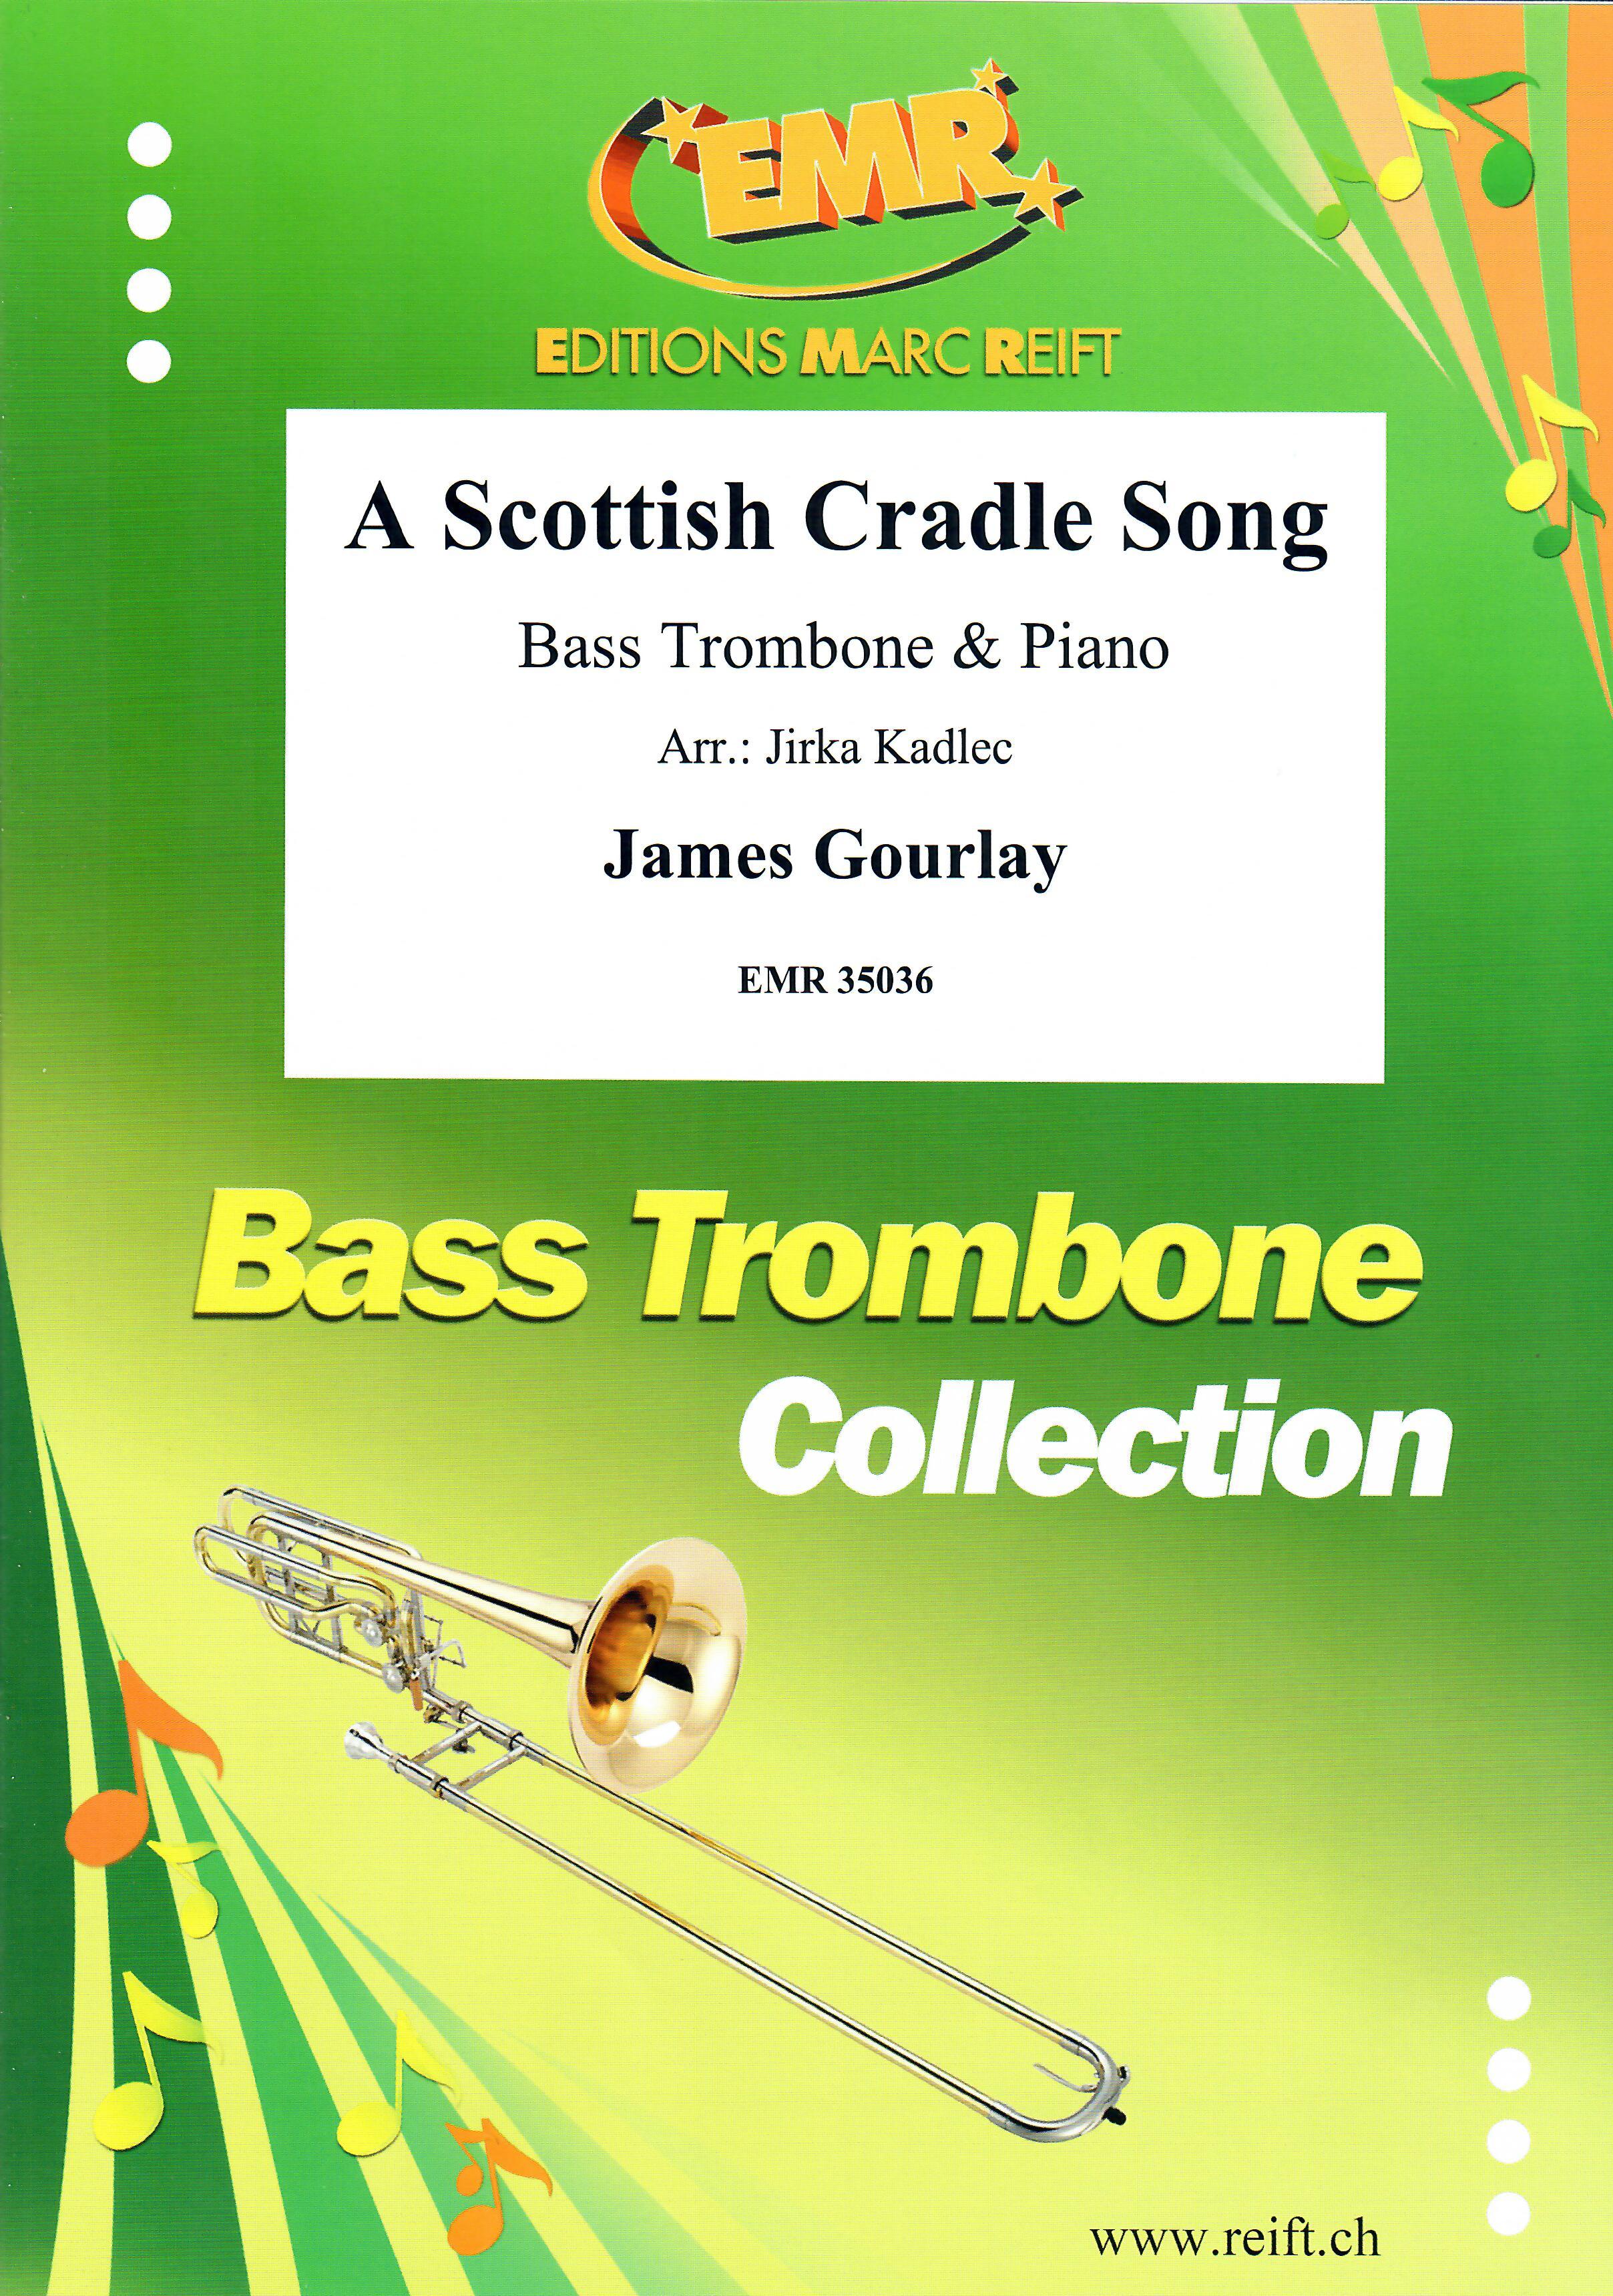 A SCOTTISH CRADLE SONG